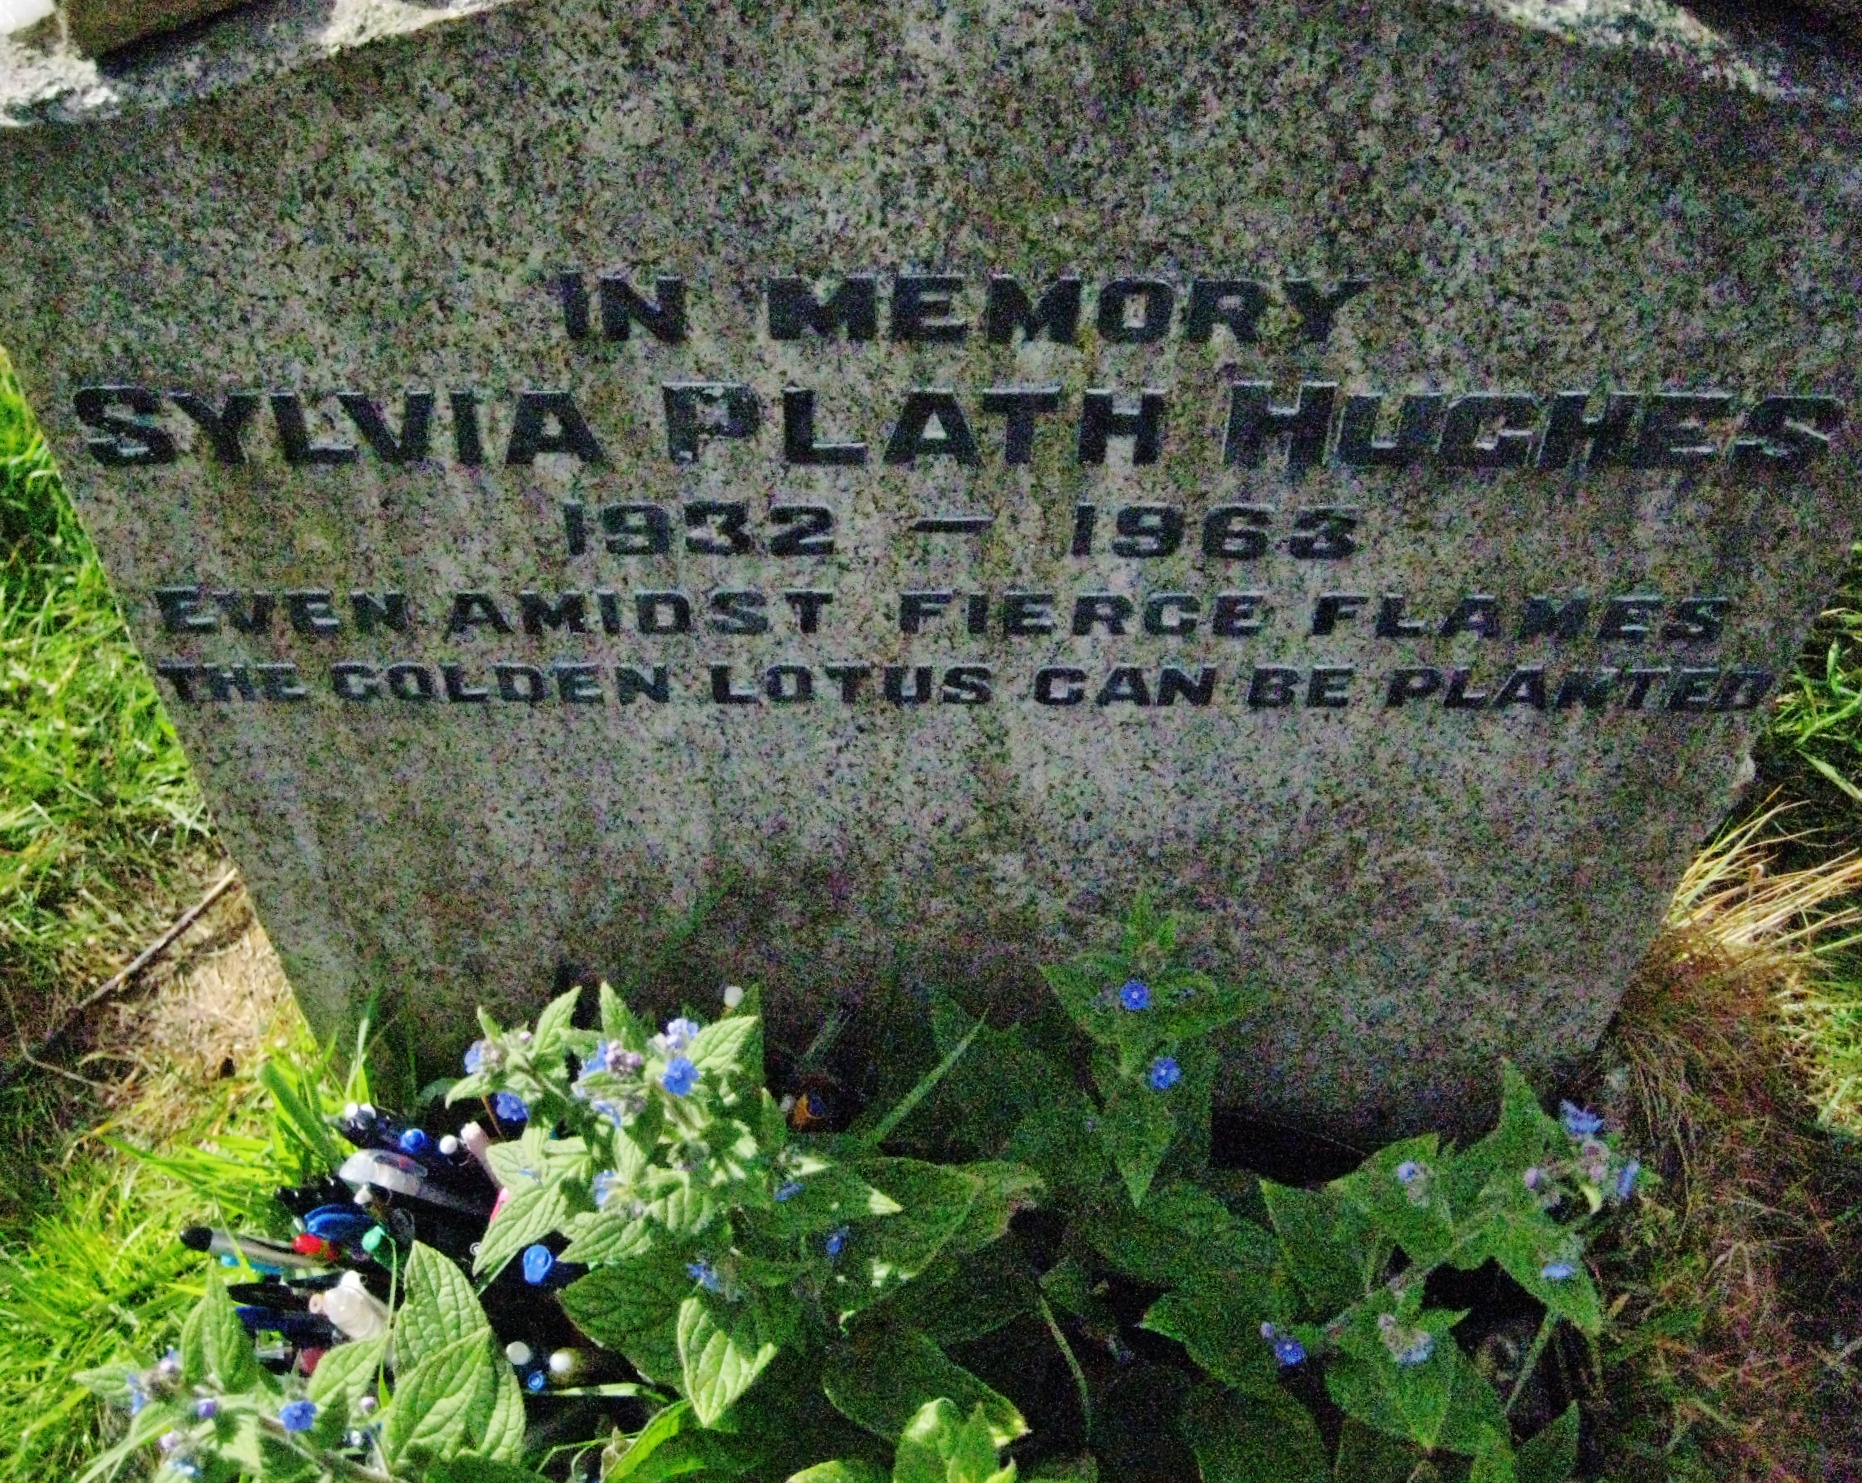 Sylvia Plath's grave in Heptonstall, West Yorkshire